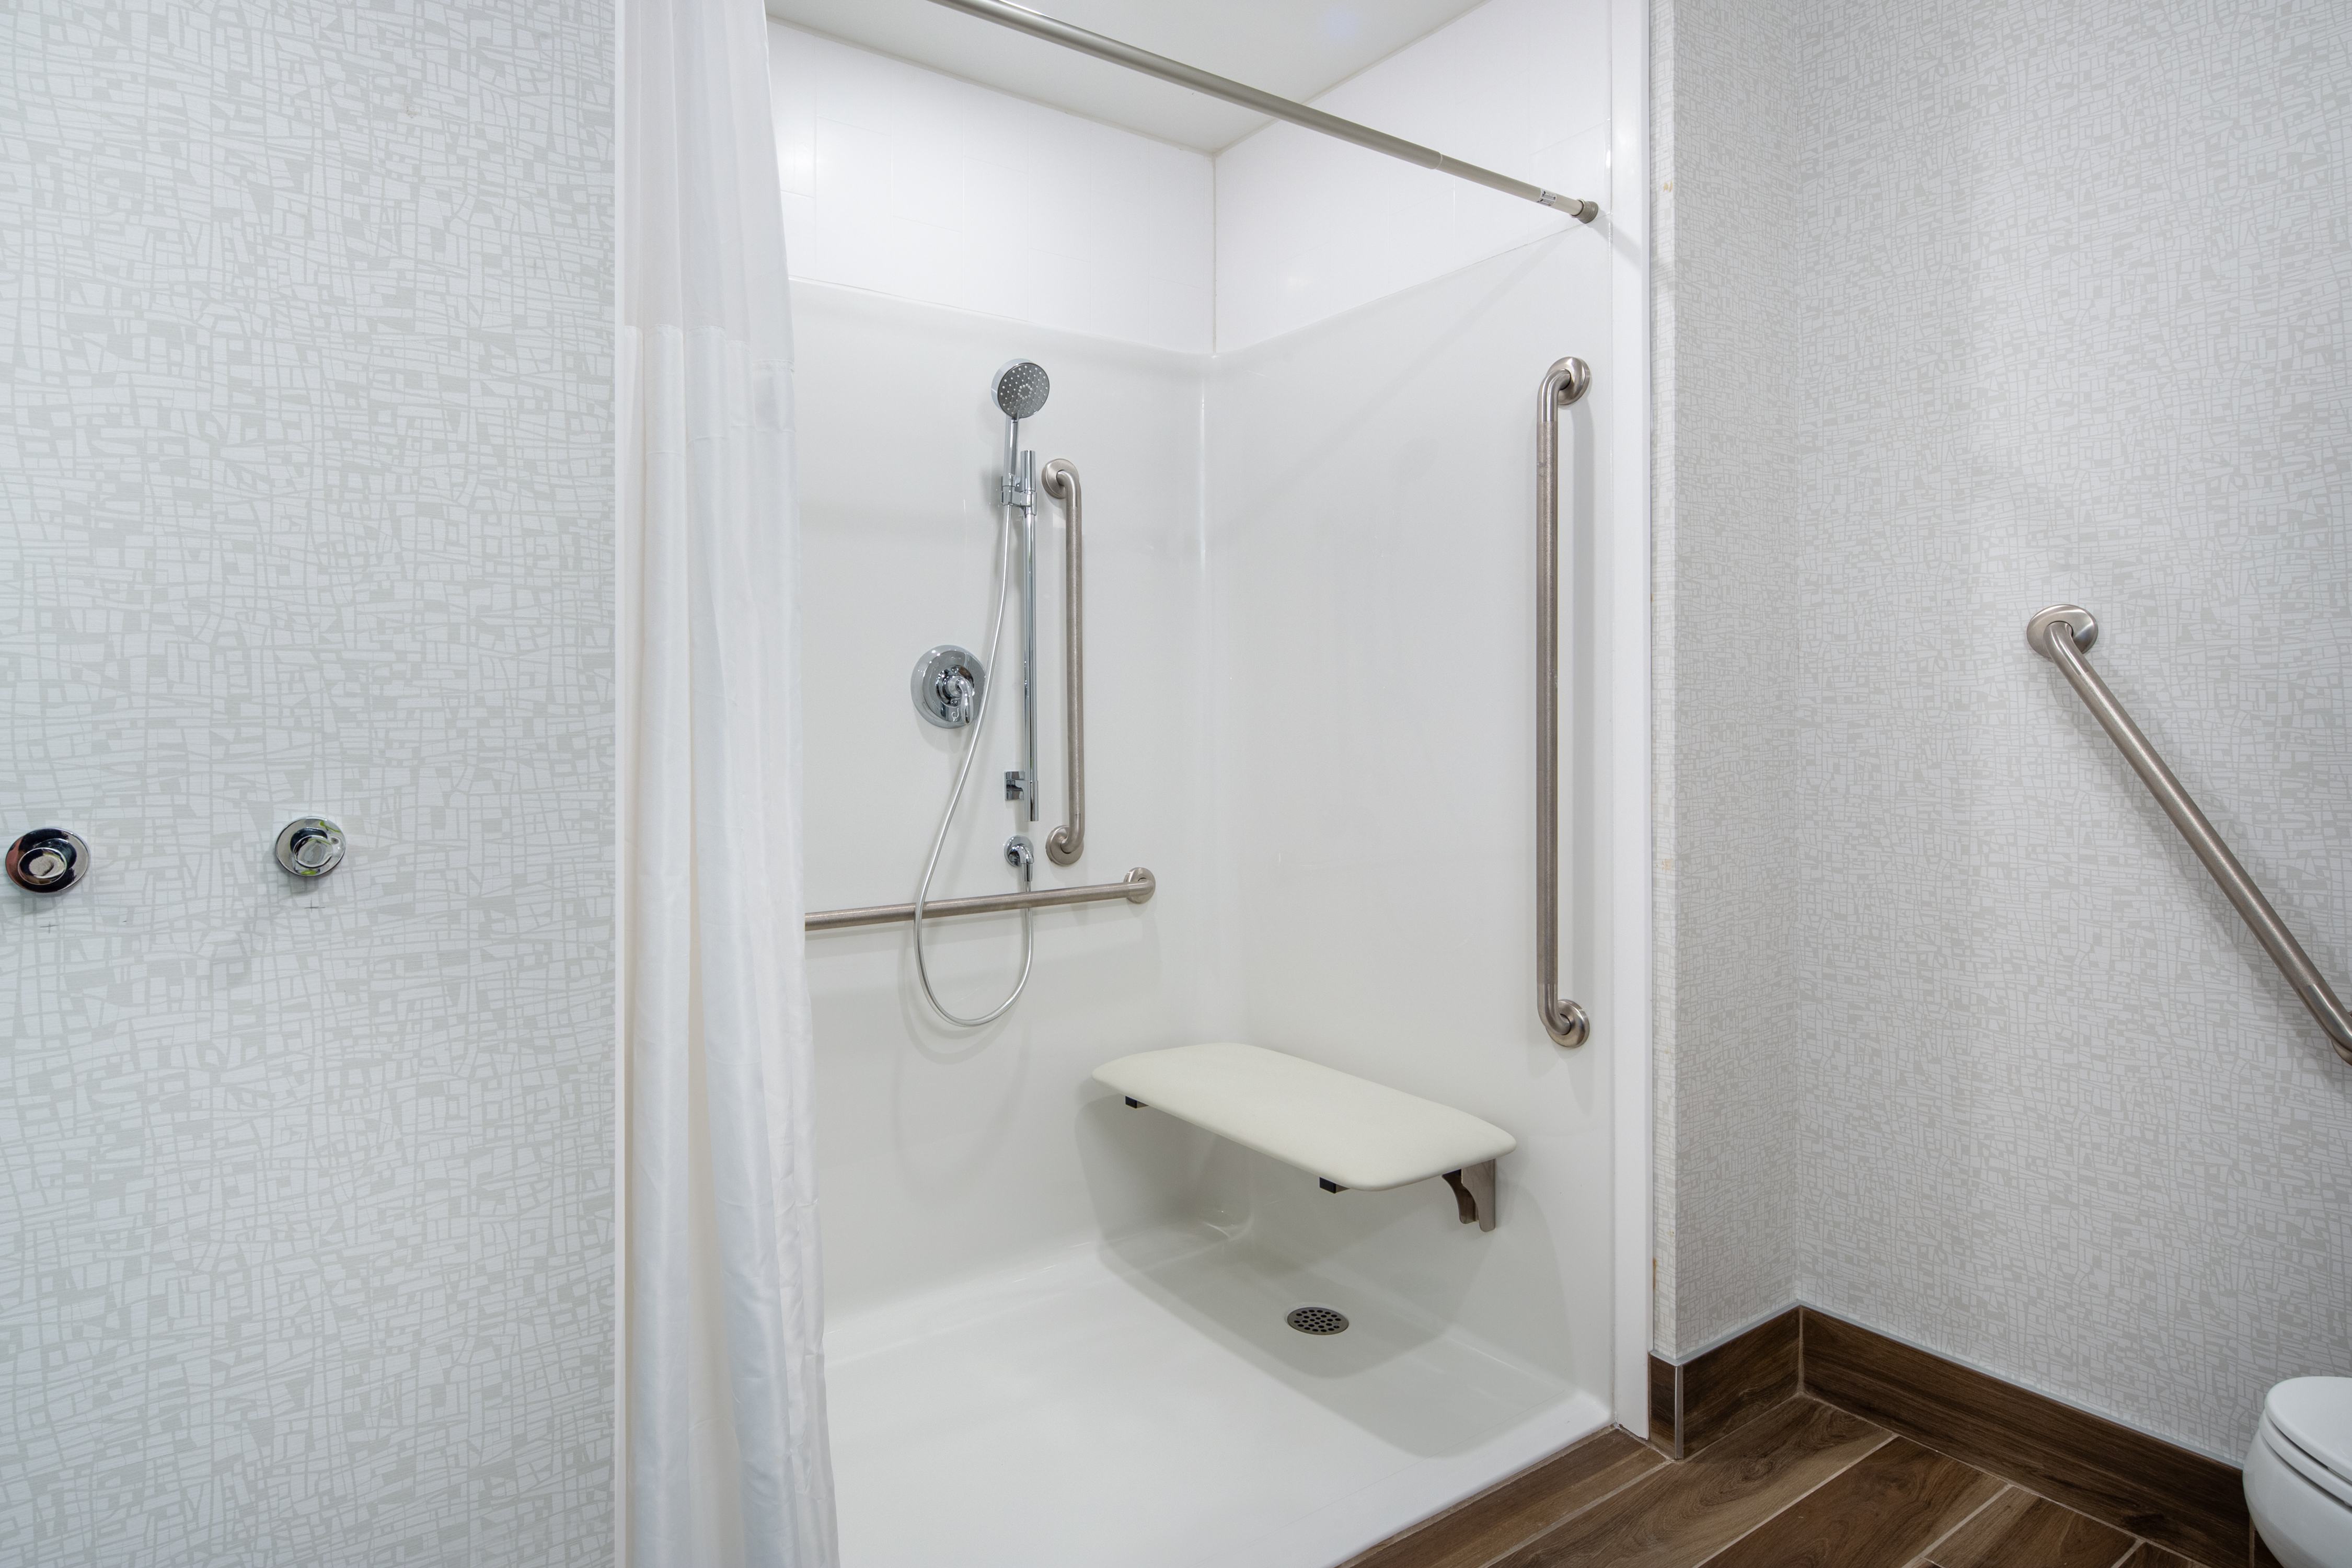 Accessible Roll-in Shower